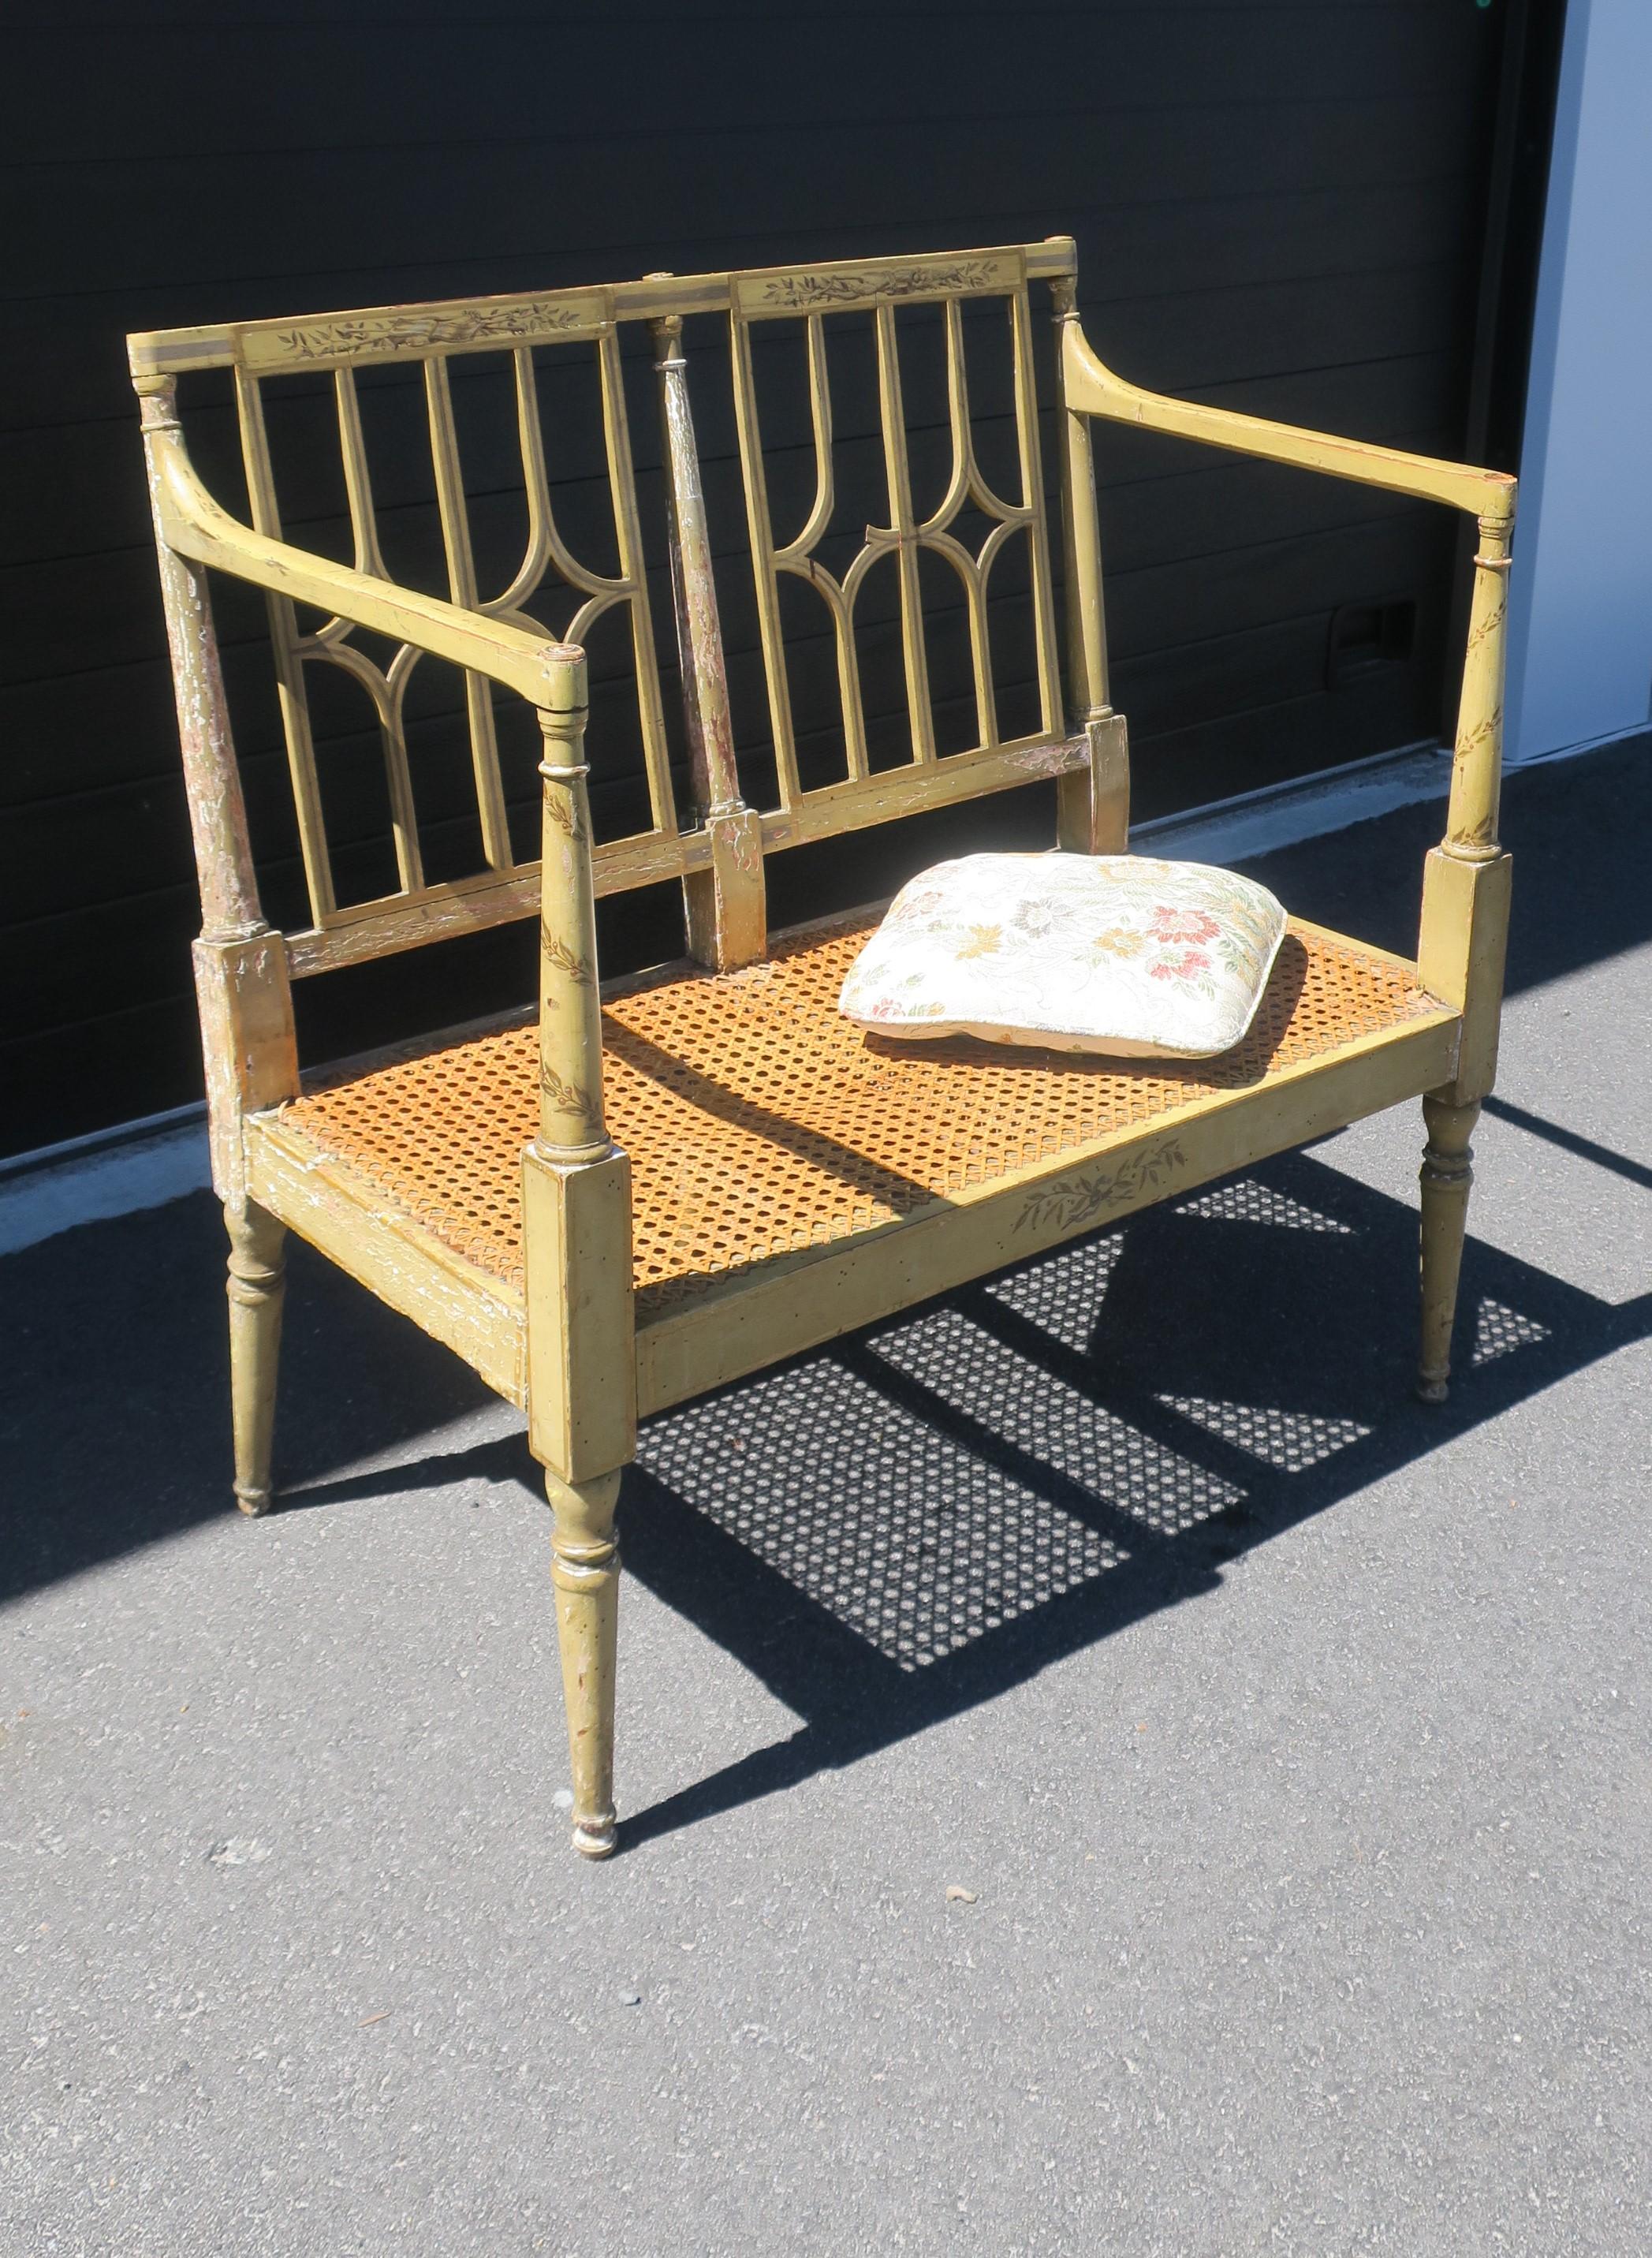 20th Century Painted Wood and Wicker Cane Loveseat Bench For Sale